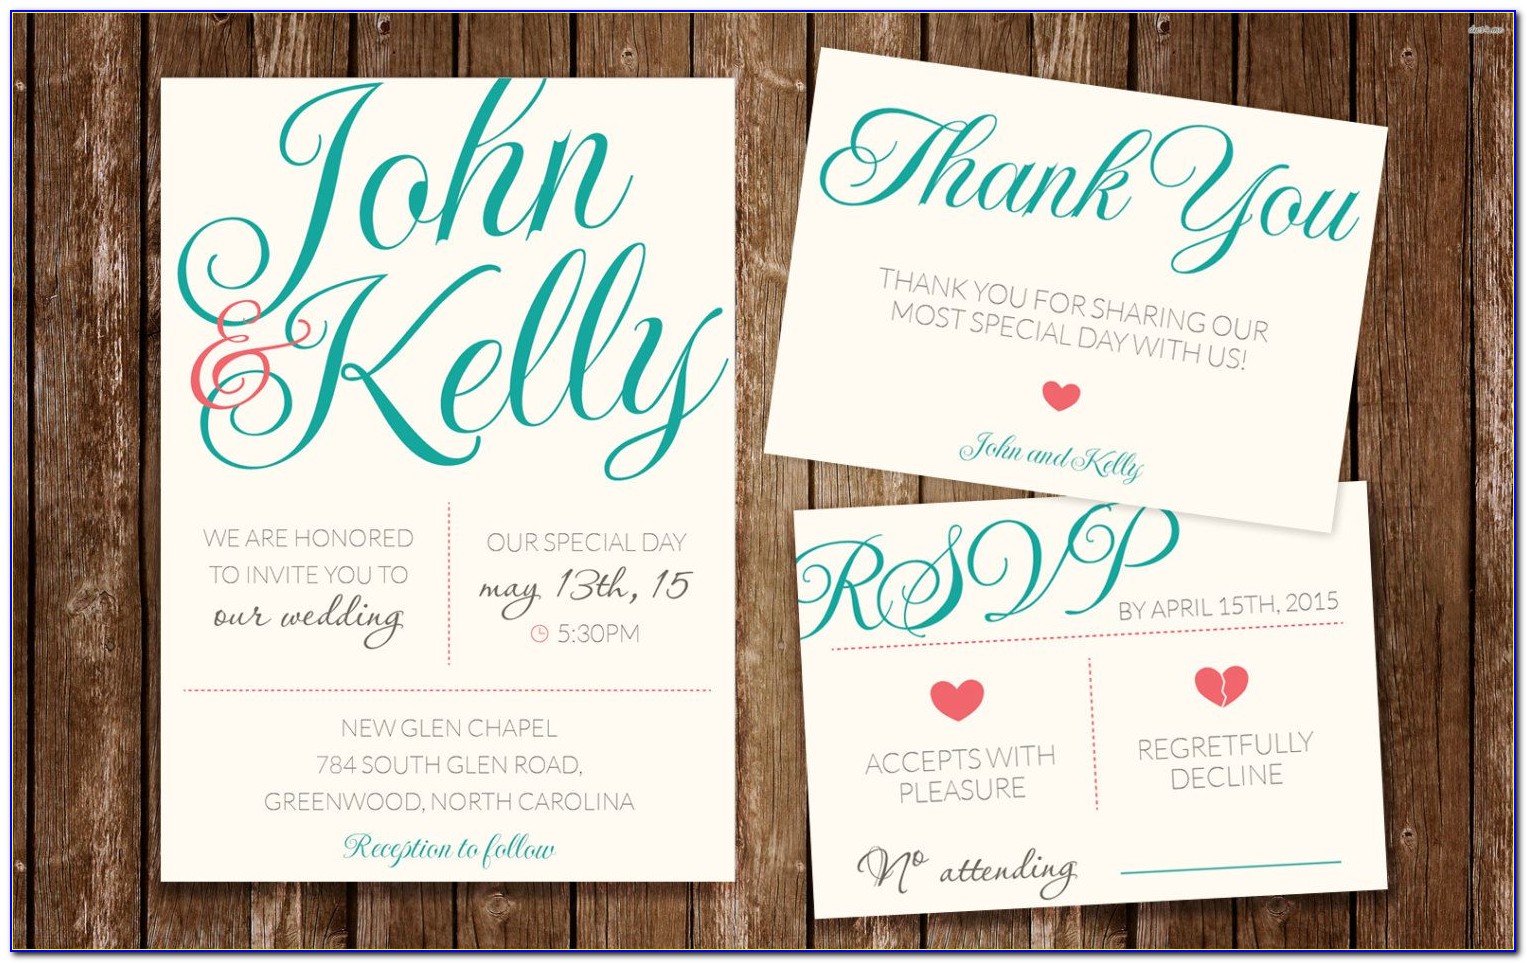 Wedding Invitations With Rsvp Cards Attached